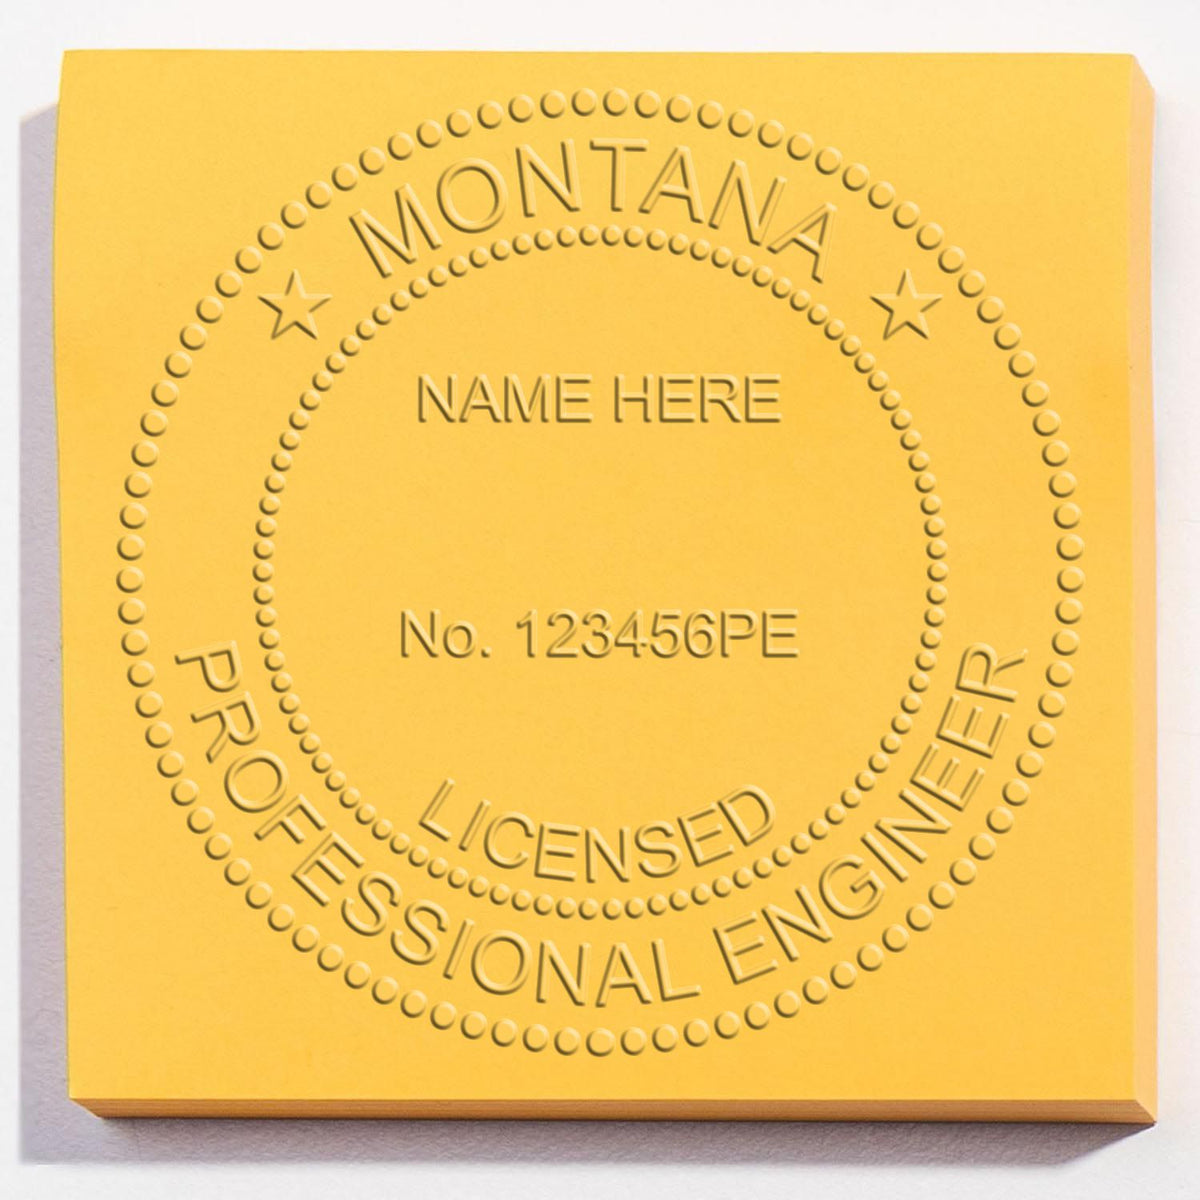 A stamped imprint of the Gift Montana Engineer Seal in this stylish lifestyle photo, setting the tone for a unique and personalized product.